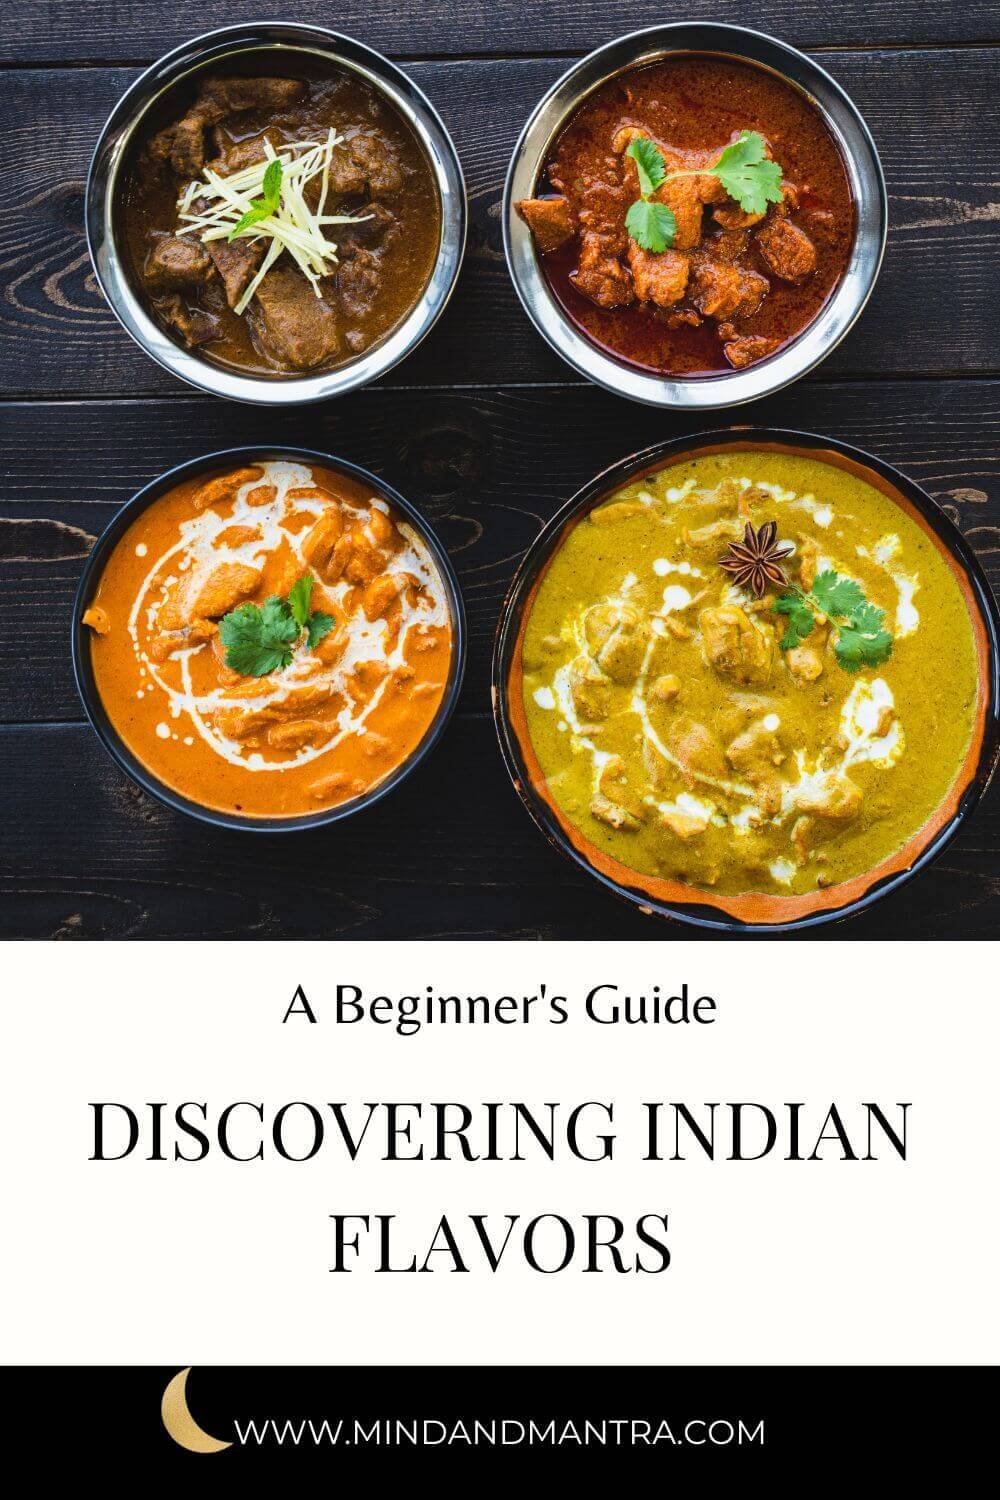 A Beginners Guide to Indian Food (3).jpg